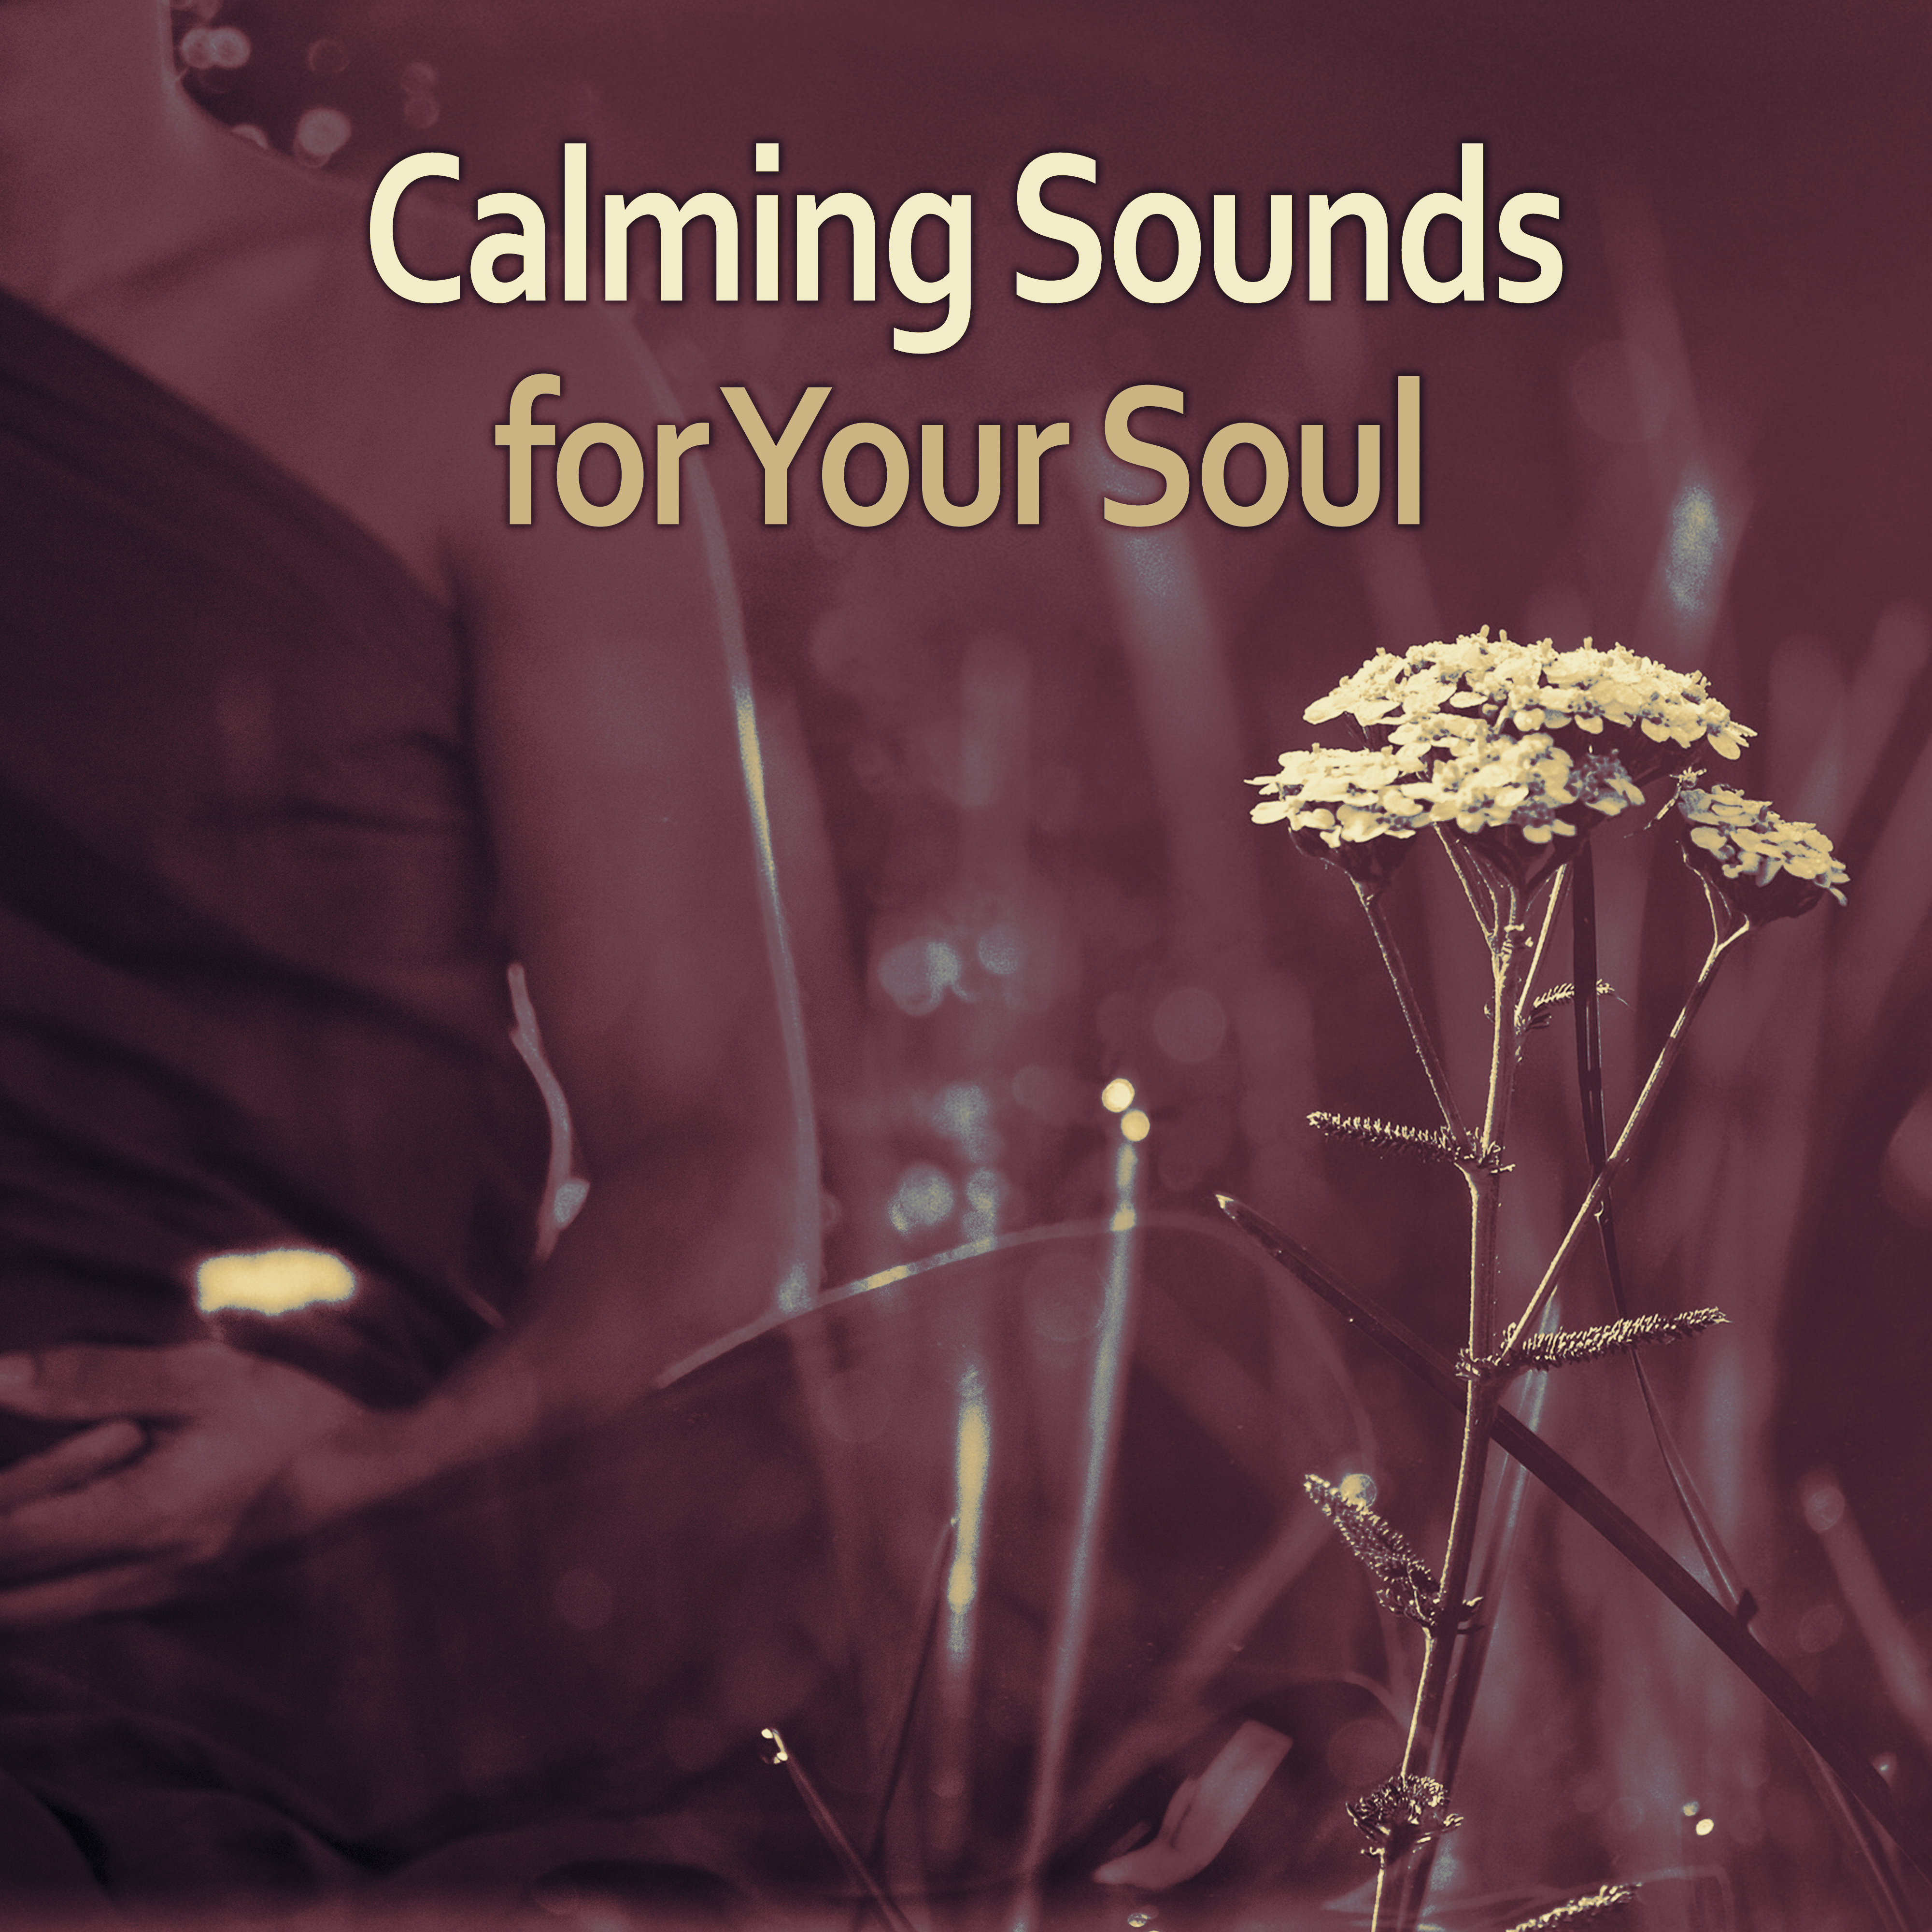 Calming Sounds for Your Soul  Meditation Awareness, Buddha Lounge, Relaxing Sounds, Inner Silence